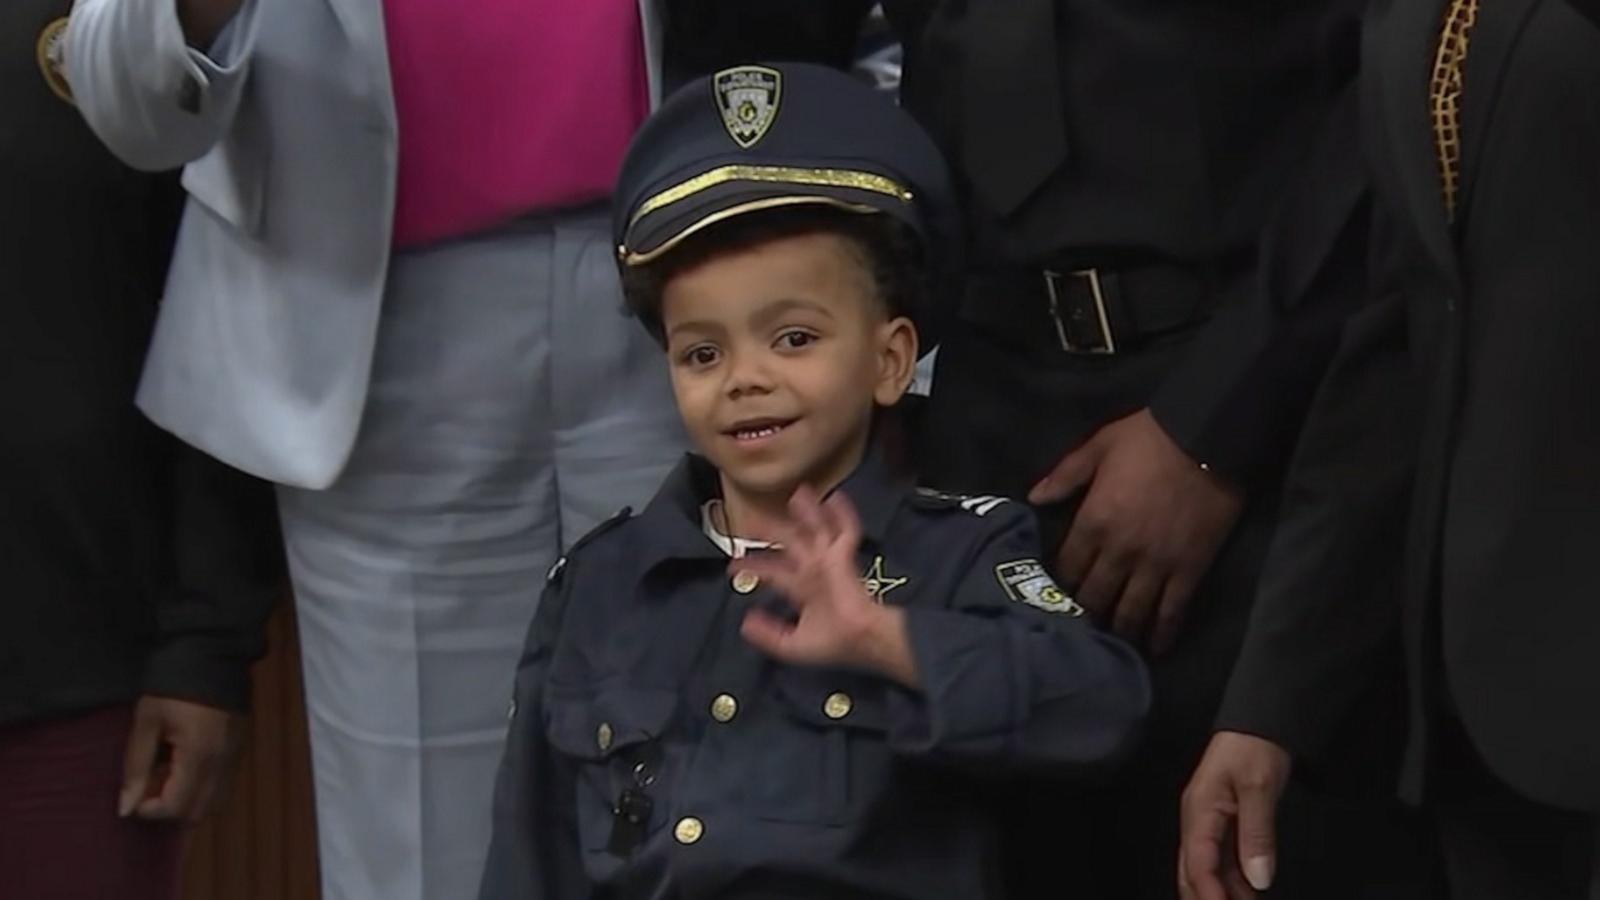 PHOTO: 6-year-old Keyjuan Andrew was sworn in as an honorary Lynwood police officer.